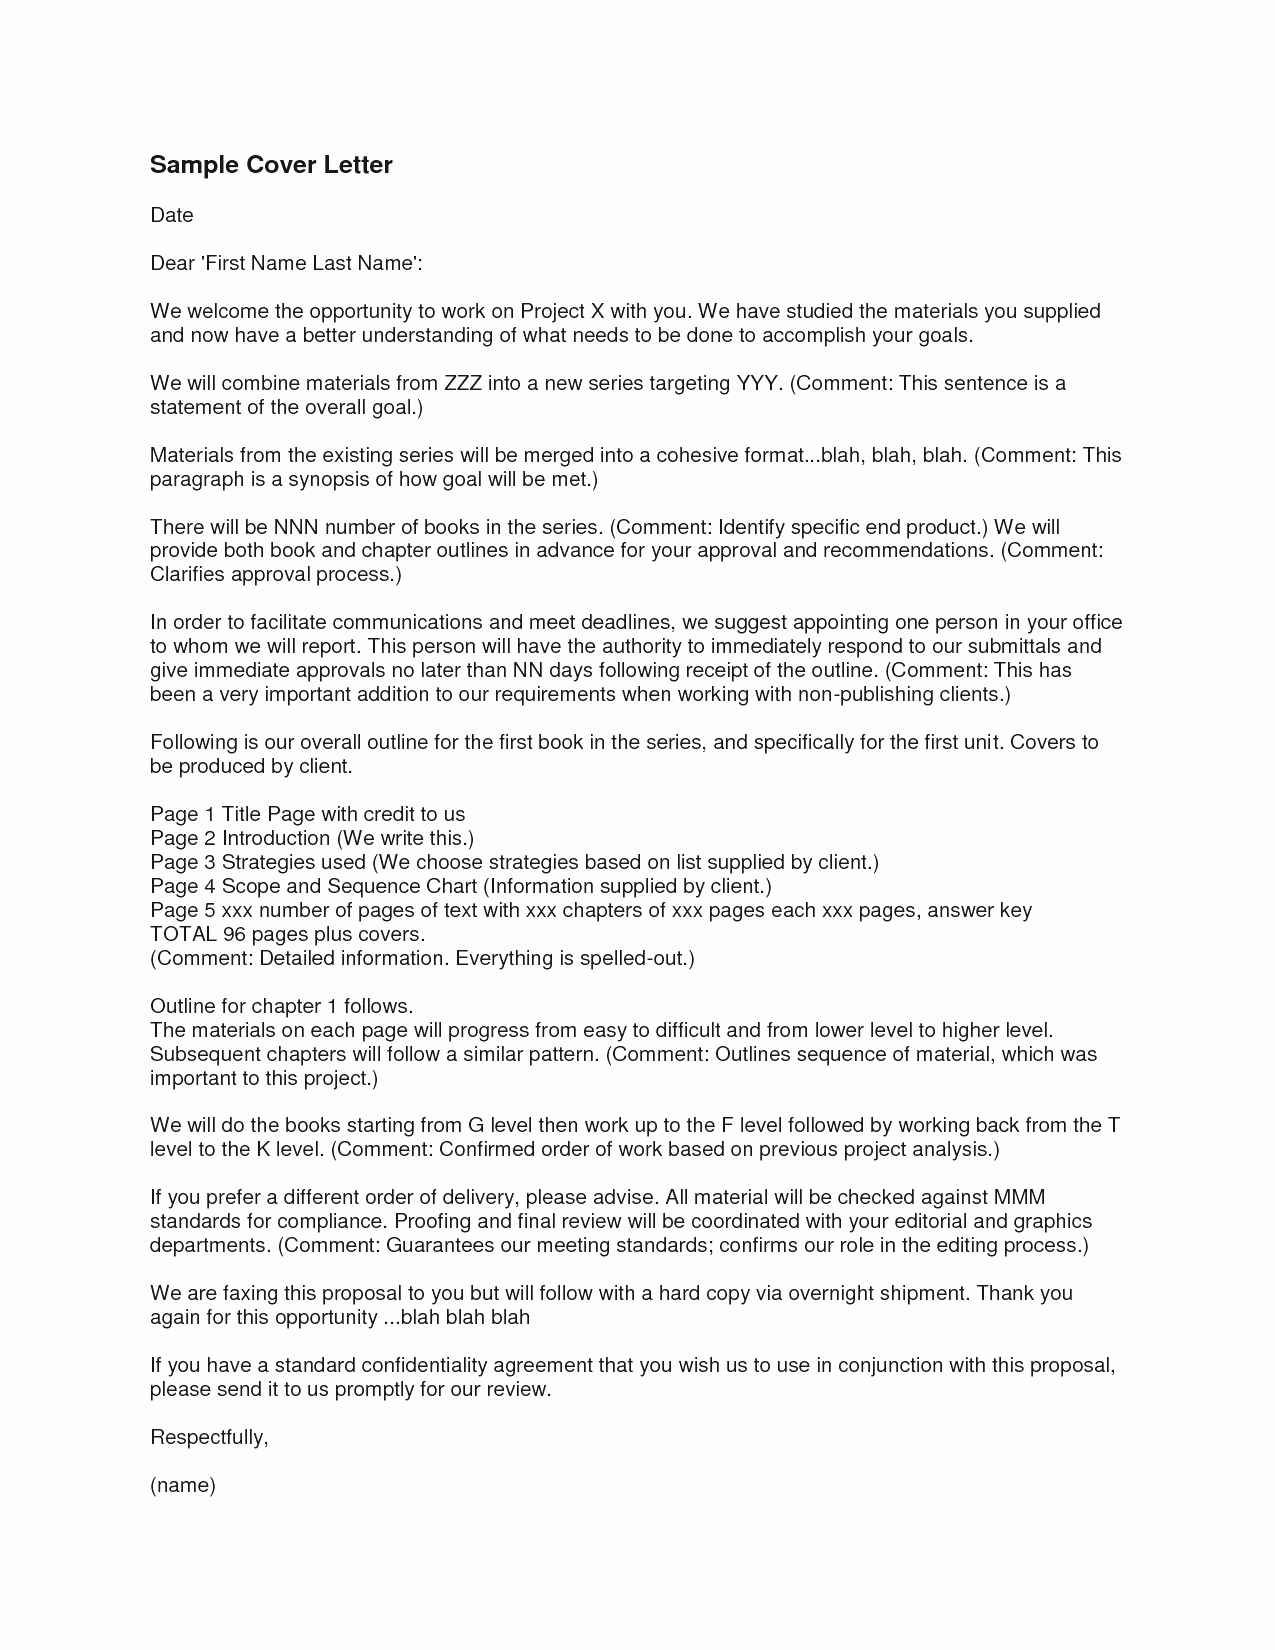 Business Proposal Letter format Luxury Business Proposal Cover Letter Example Mughals